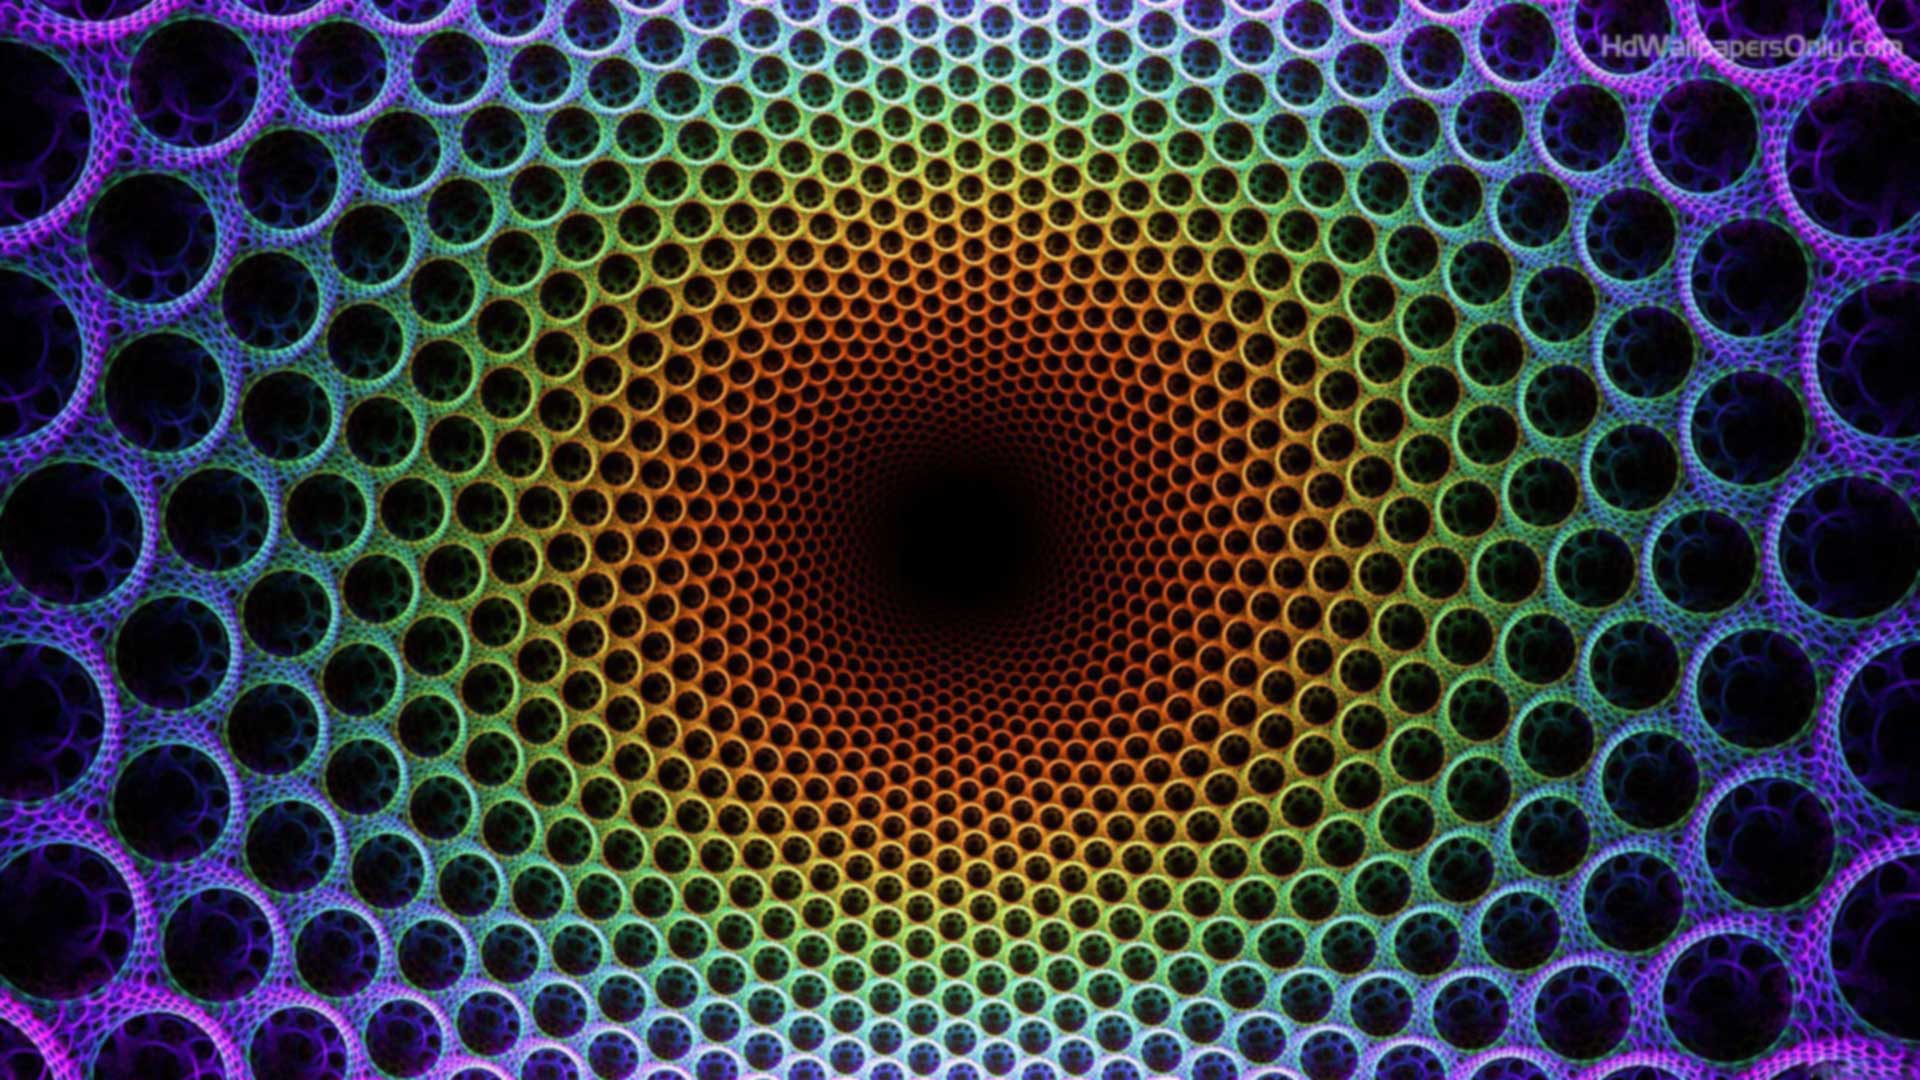 Moving Illusion HD Wallpaper, Background Image